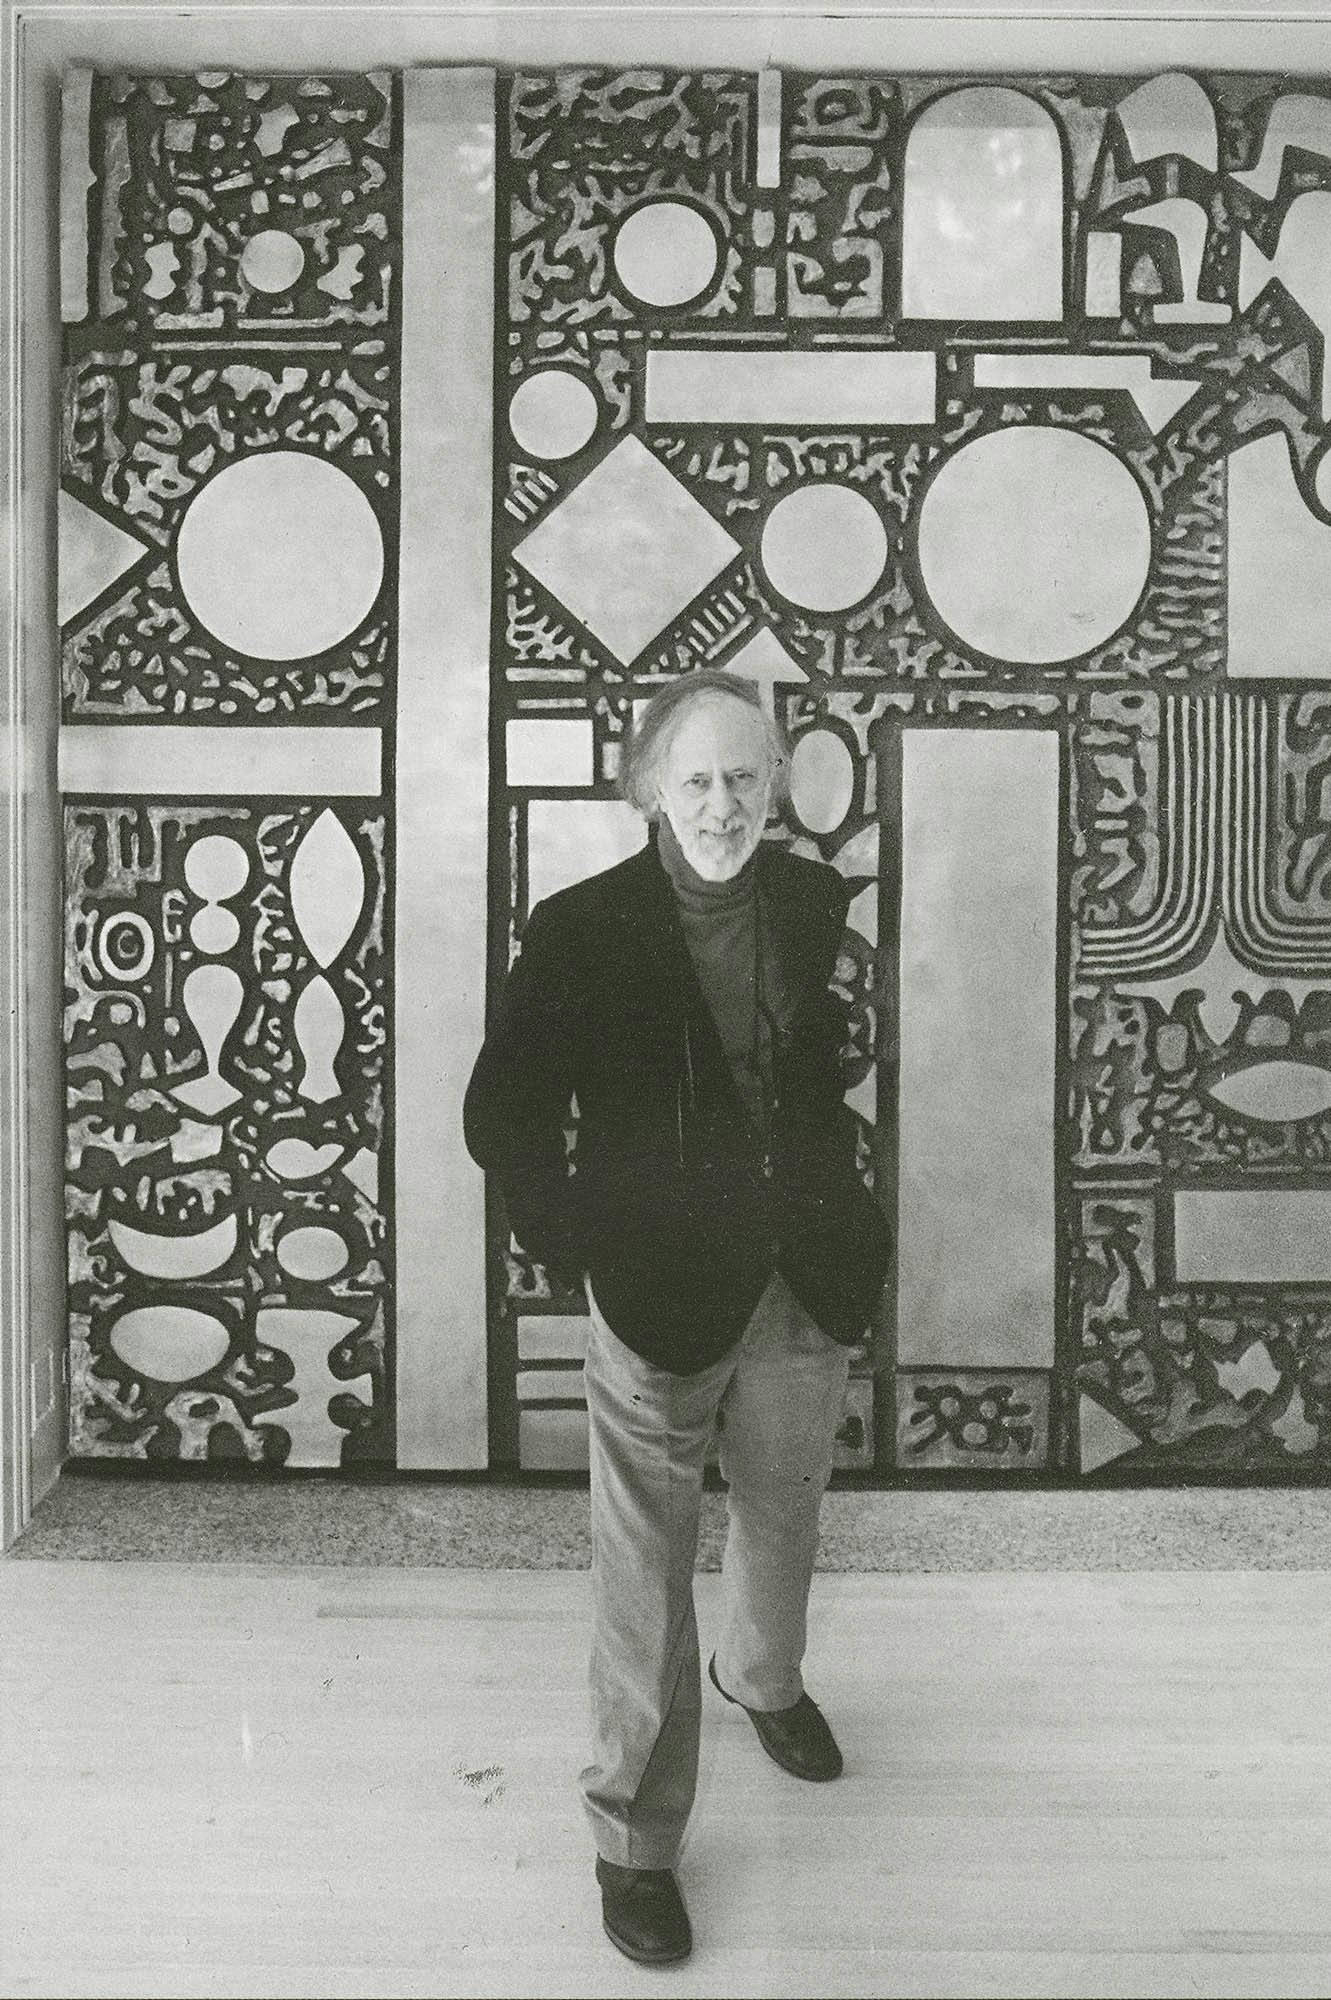 Richard Pousette-Dart with _Cathedral_, 1990, bronze, 120 x 120 x 11 in. (304.8 x 304.8 x 27.9 cm). Indianapolis Museum of Art, Ind., Gift of Robert S. Ashby, Susan Gatch Ashby, and Richard Pousette-Dart (1991.40)
 – The Richard Pousette-Dart Foundation